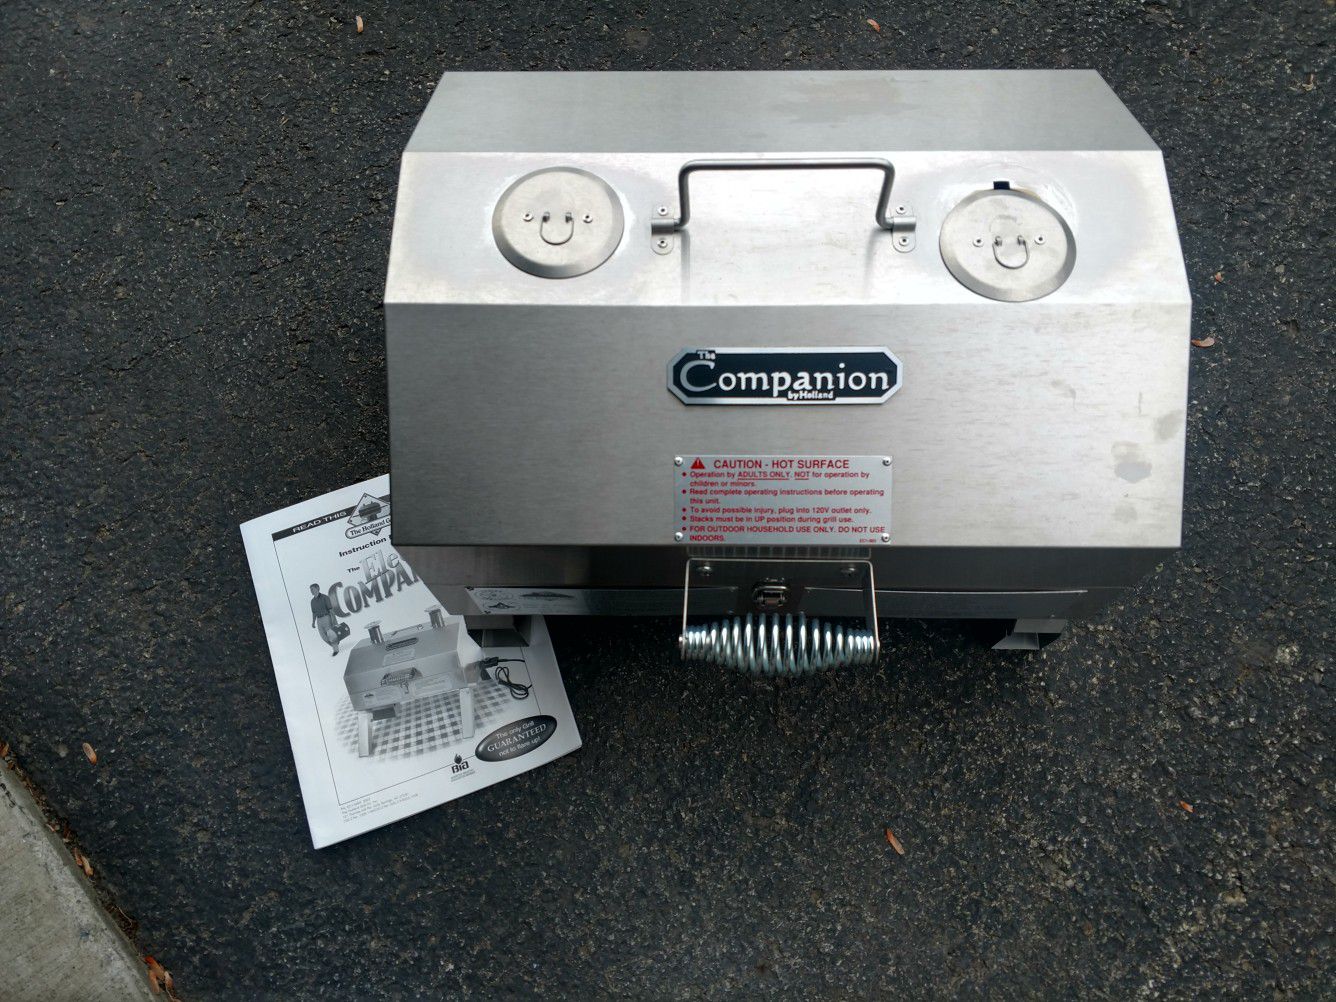 Electric Companion by Holland Grill